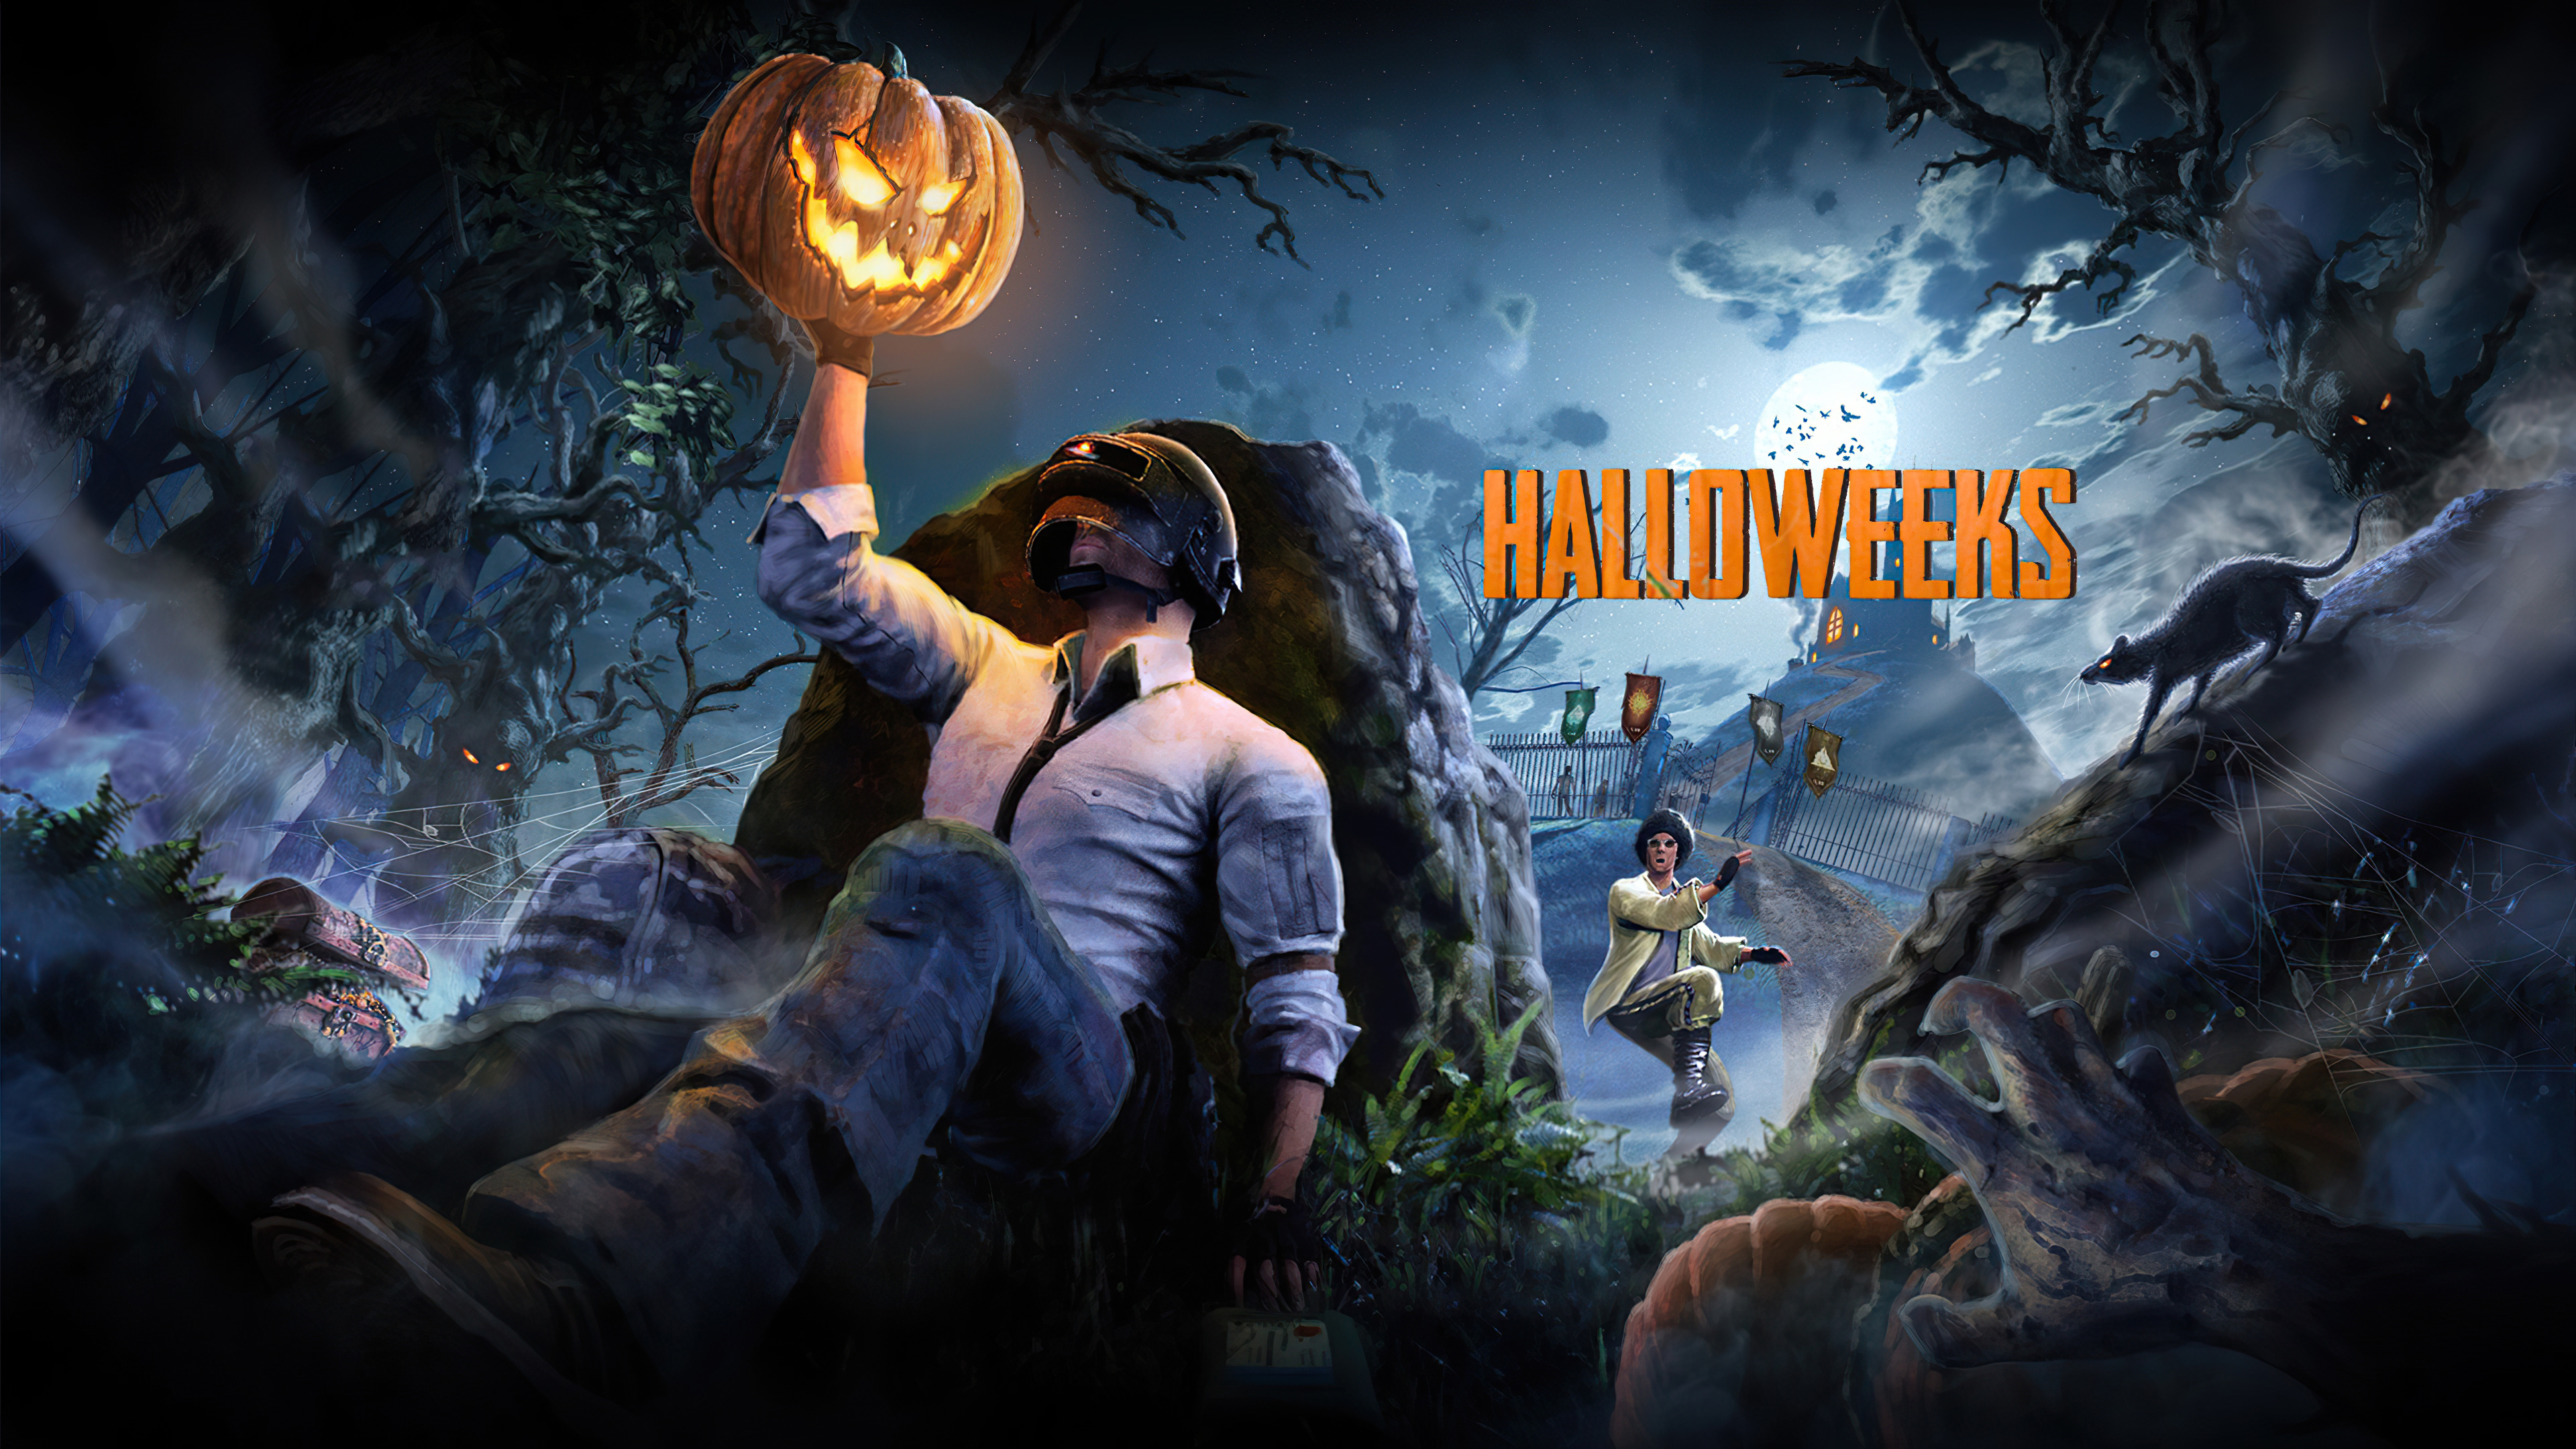 Halloween picture from Playerunknowns Battlegrounds game